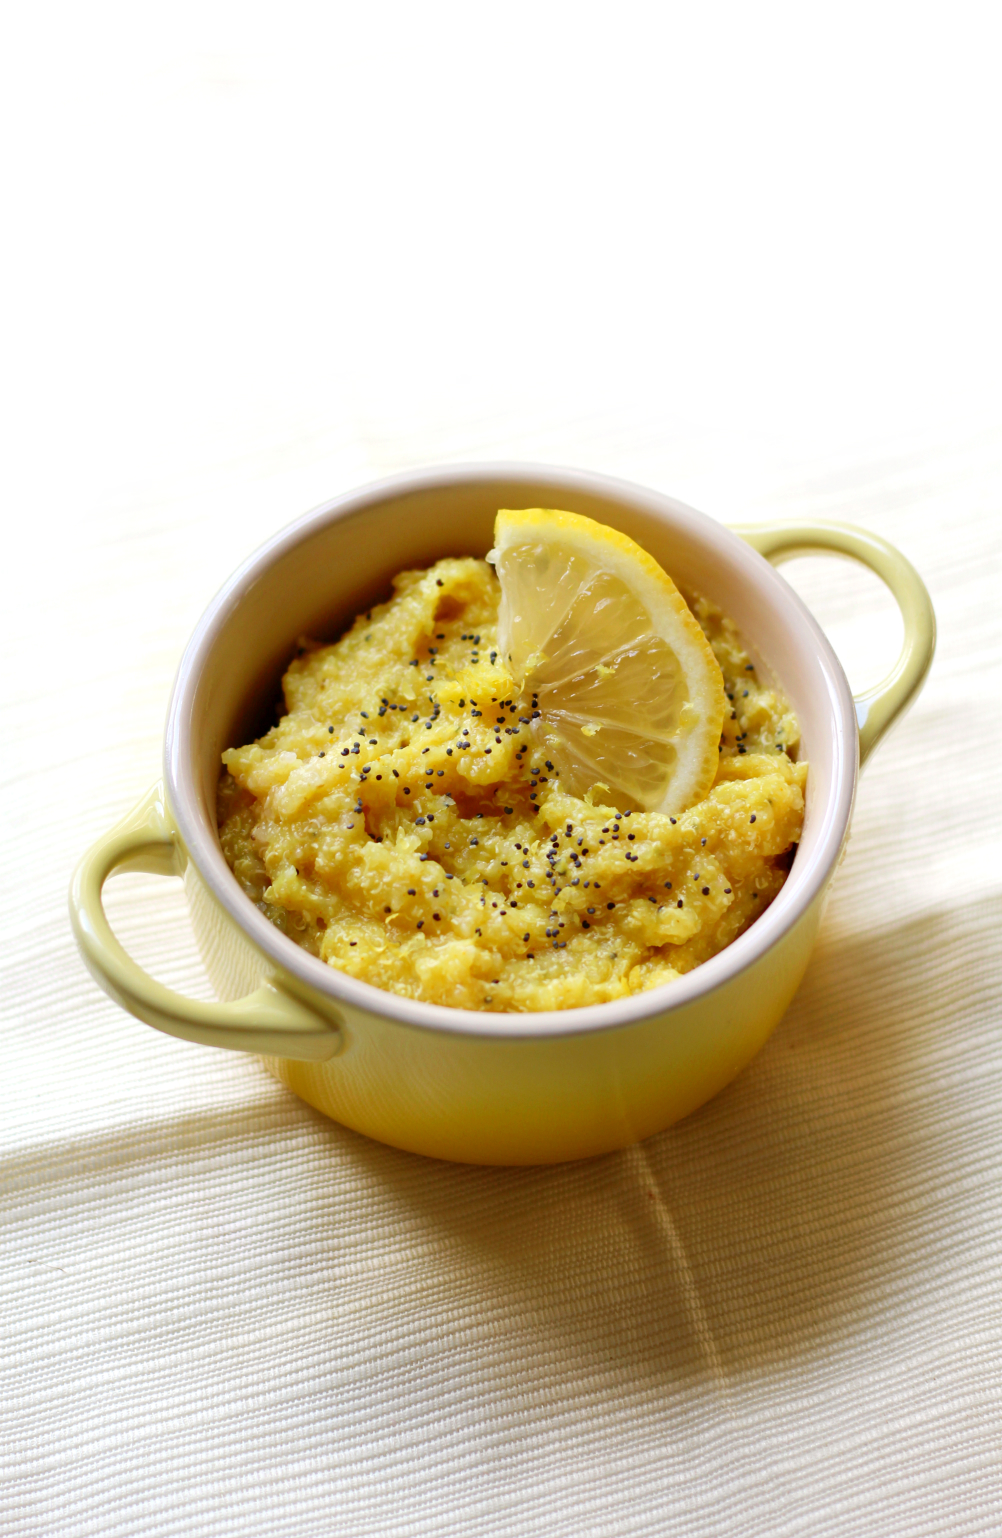 Lemon Poppy Seed Quinoa Flakes | Strength and Sunshine @RebeccaGF666 A sweet, protein-packed zing for breakfast! Gluten-free and vegan lemon poppy seed quinoa flakes is a perfect warm porridge recipe that will leave you feeling bright and ready to start you day in a healthy way!